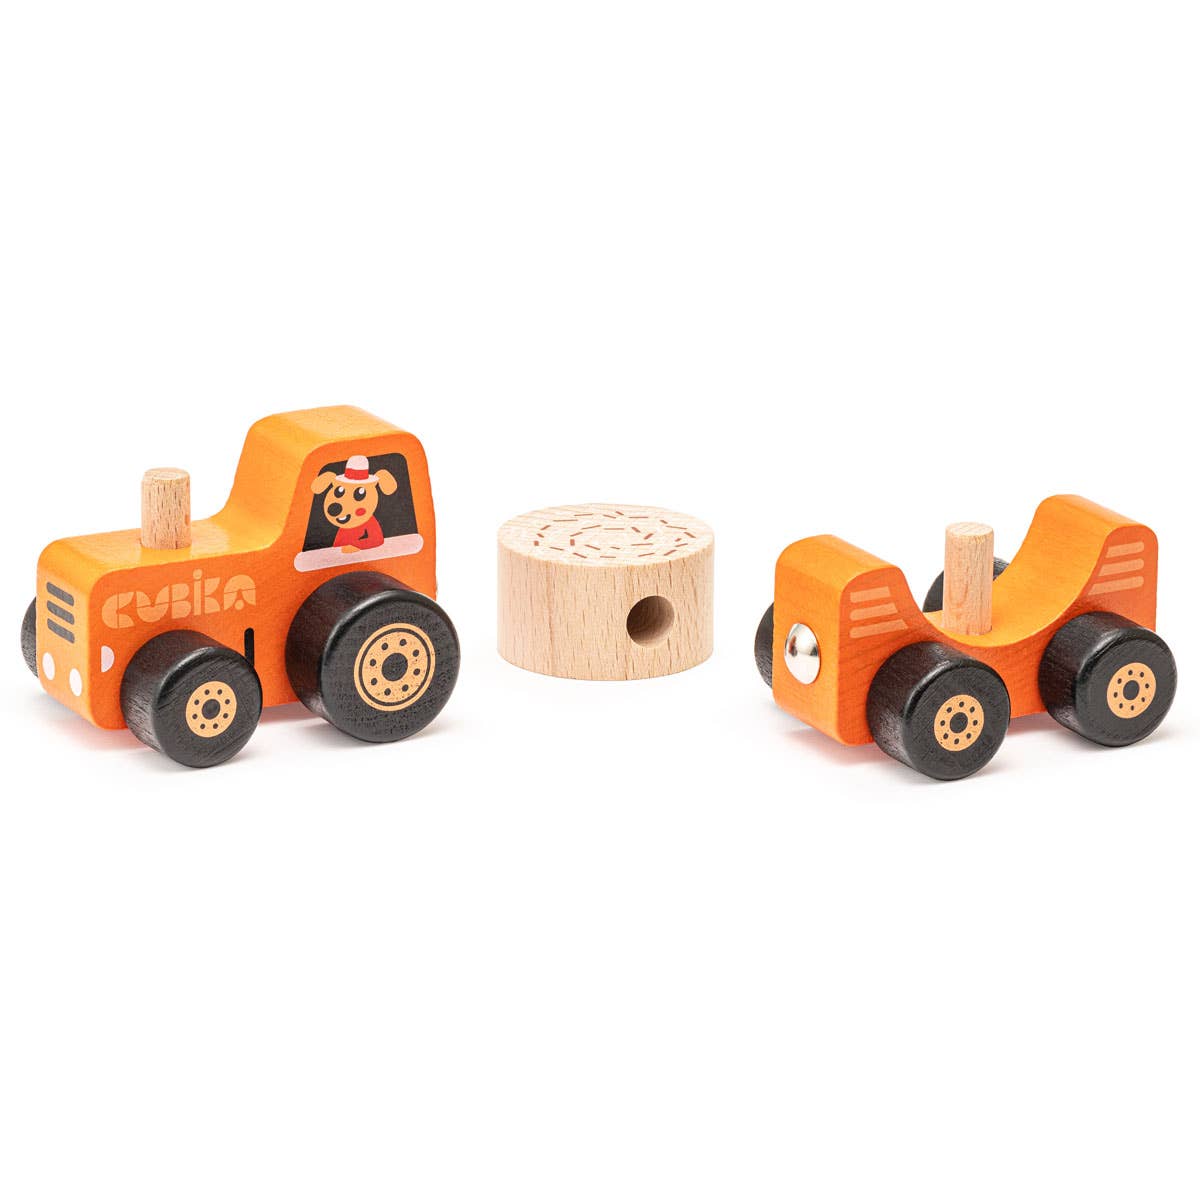 Cubika - Wooden Tractor On Magnets